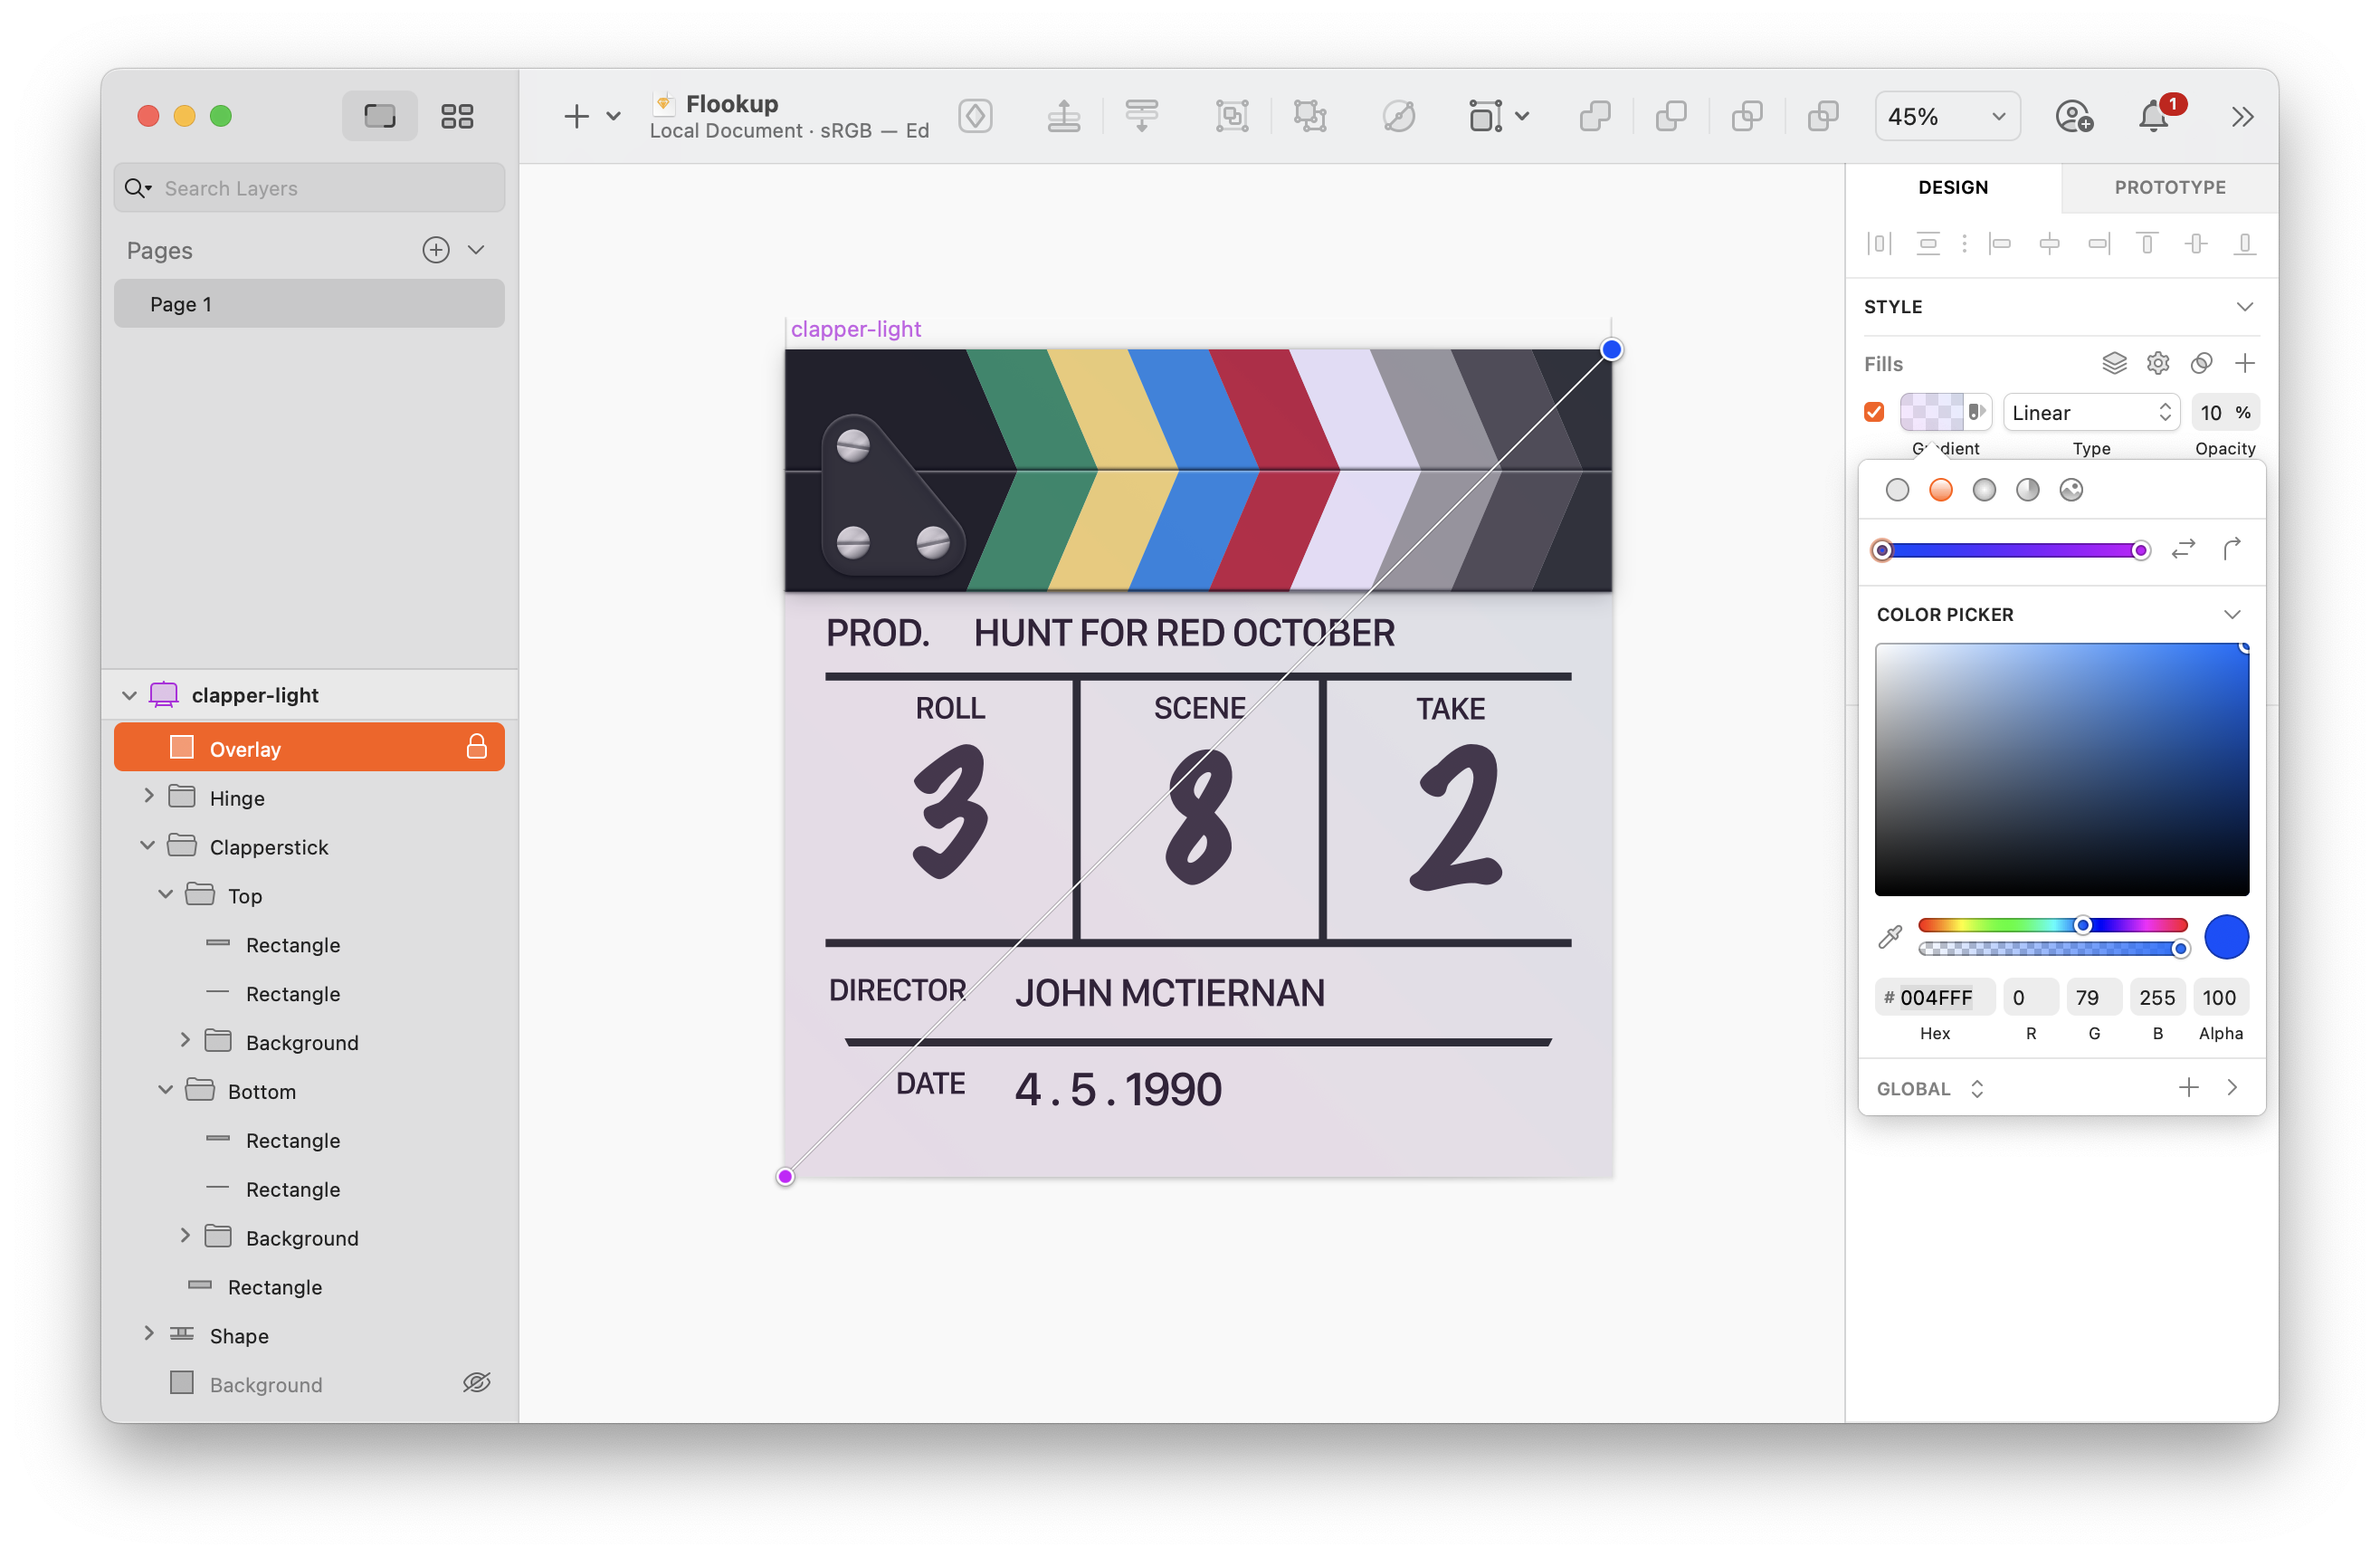 A screenshot of Sketch with the icon's slate in the work area. The "Overlay" layer is selected, and the gradient is being edited, showing the path it takes from purple in the bottom left to blue in the top right.